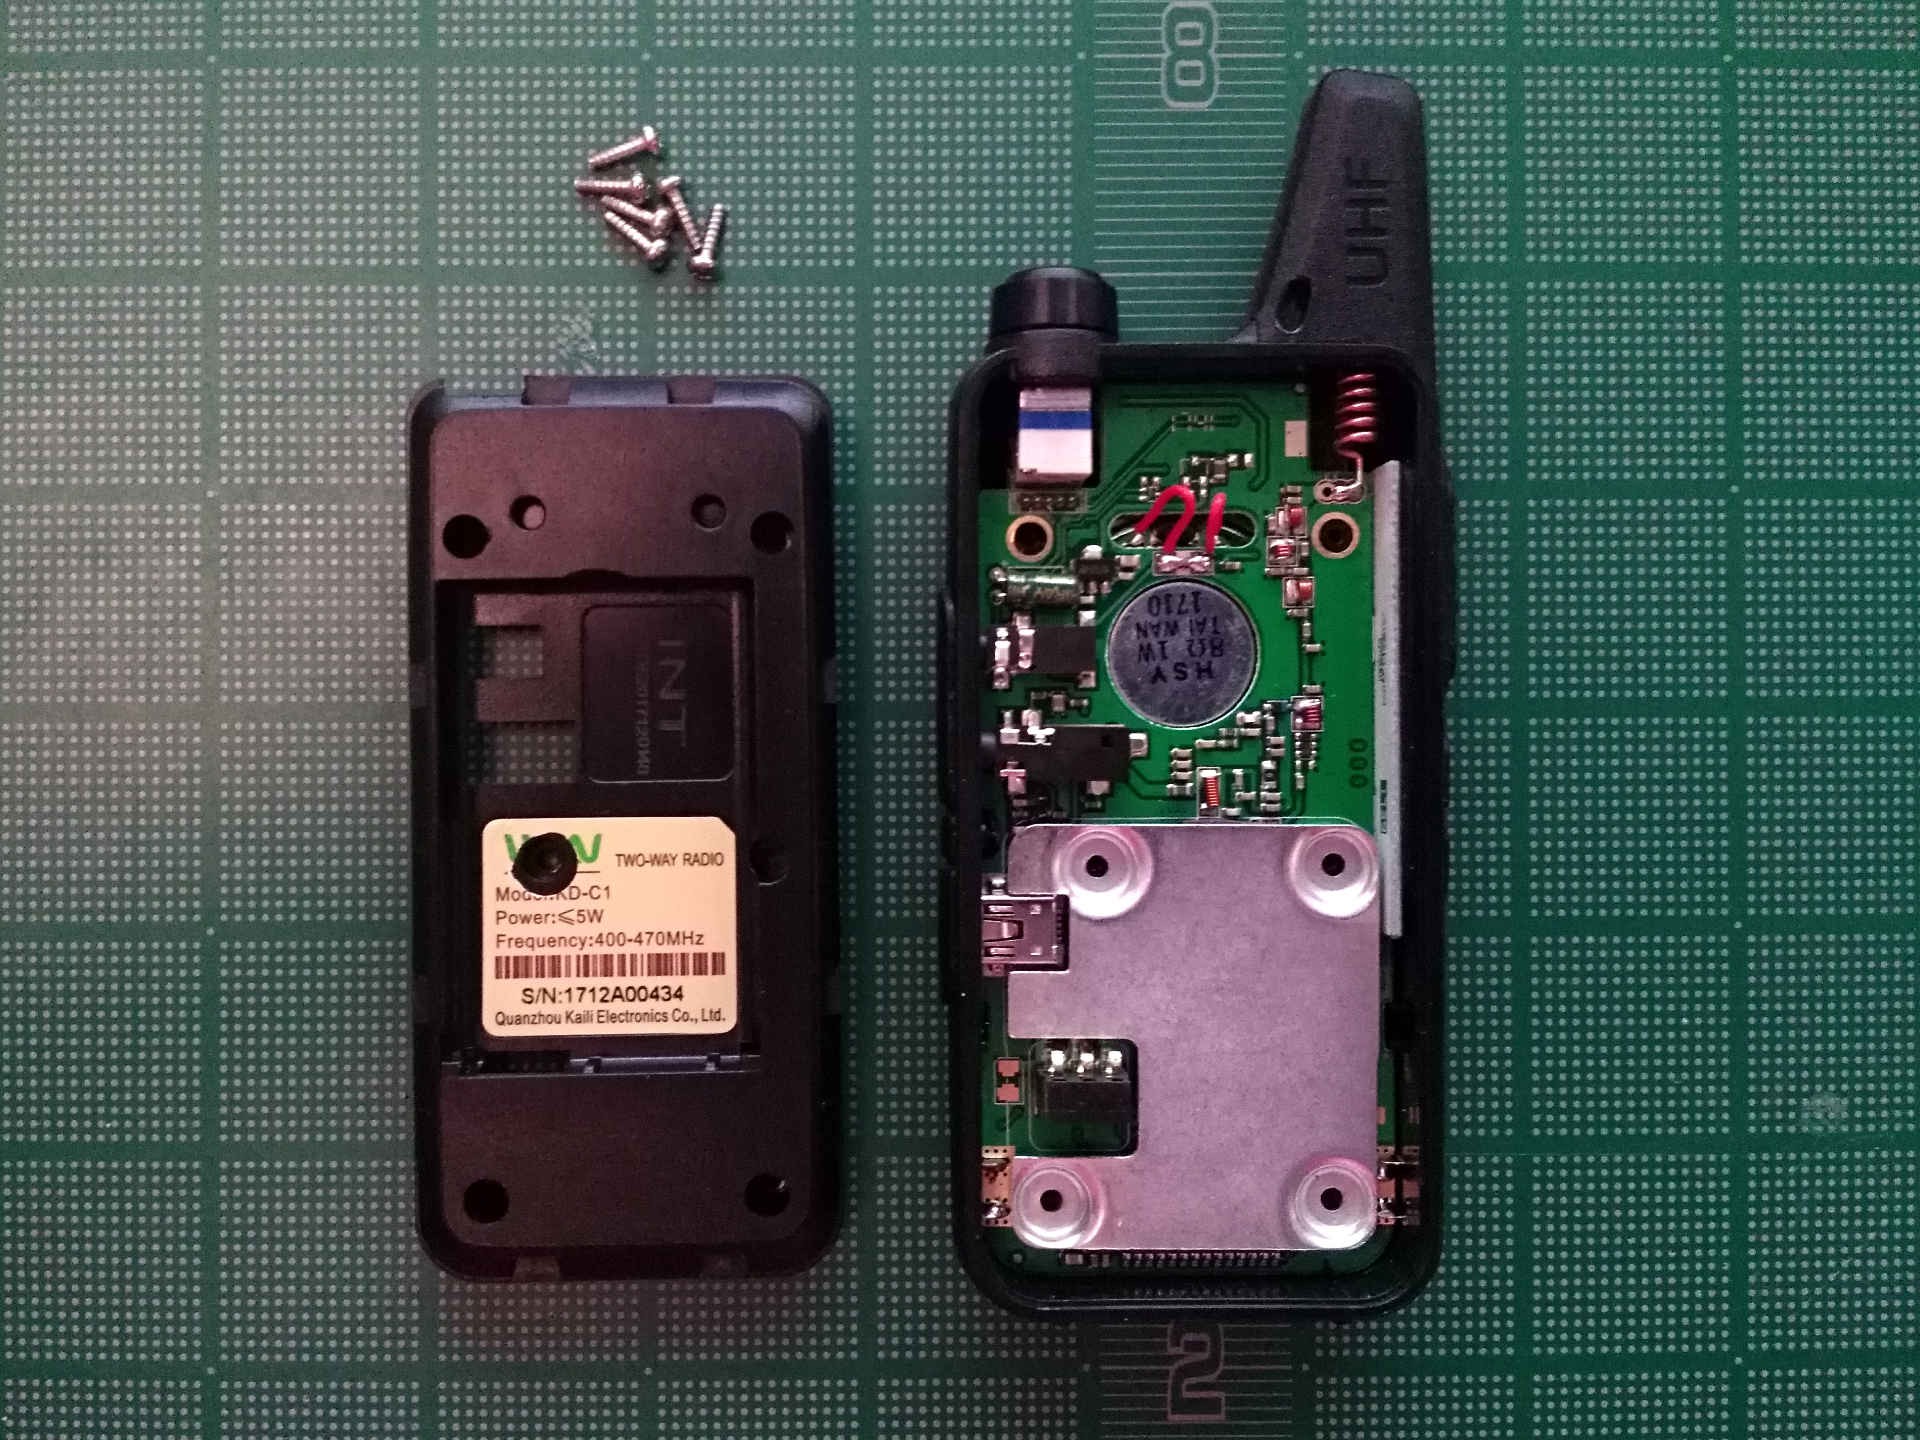 Radio with back half removed exposing PCB